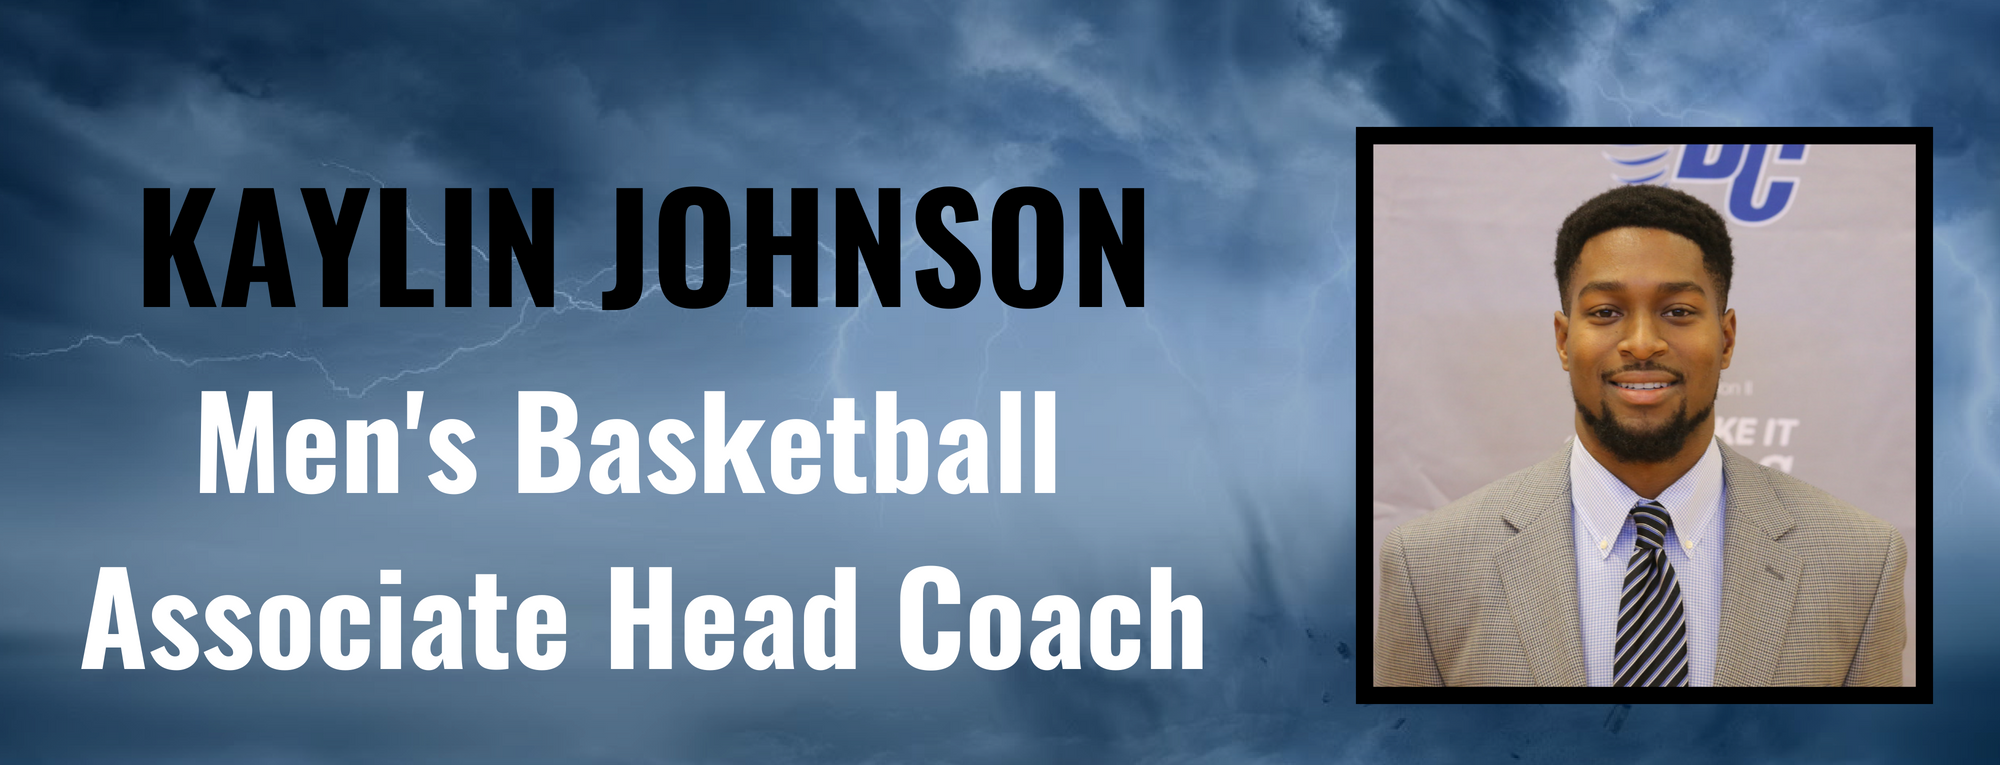 Johnson Promoted to Associate Head Coach